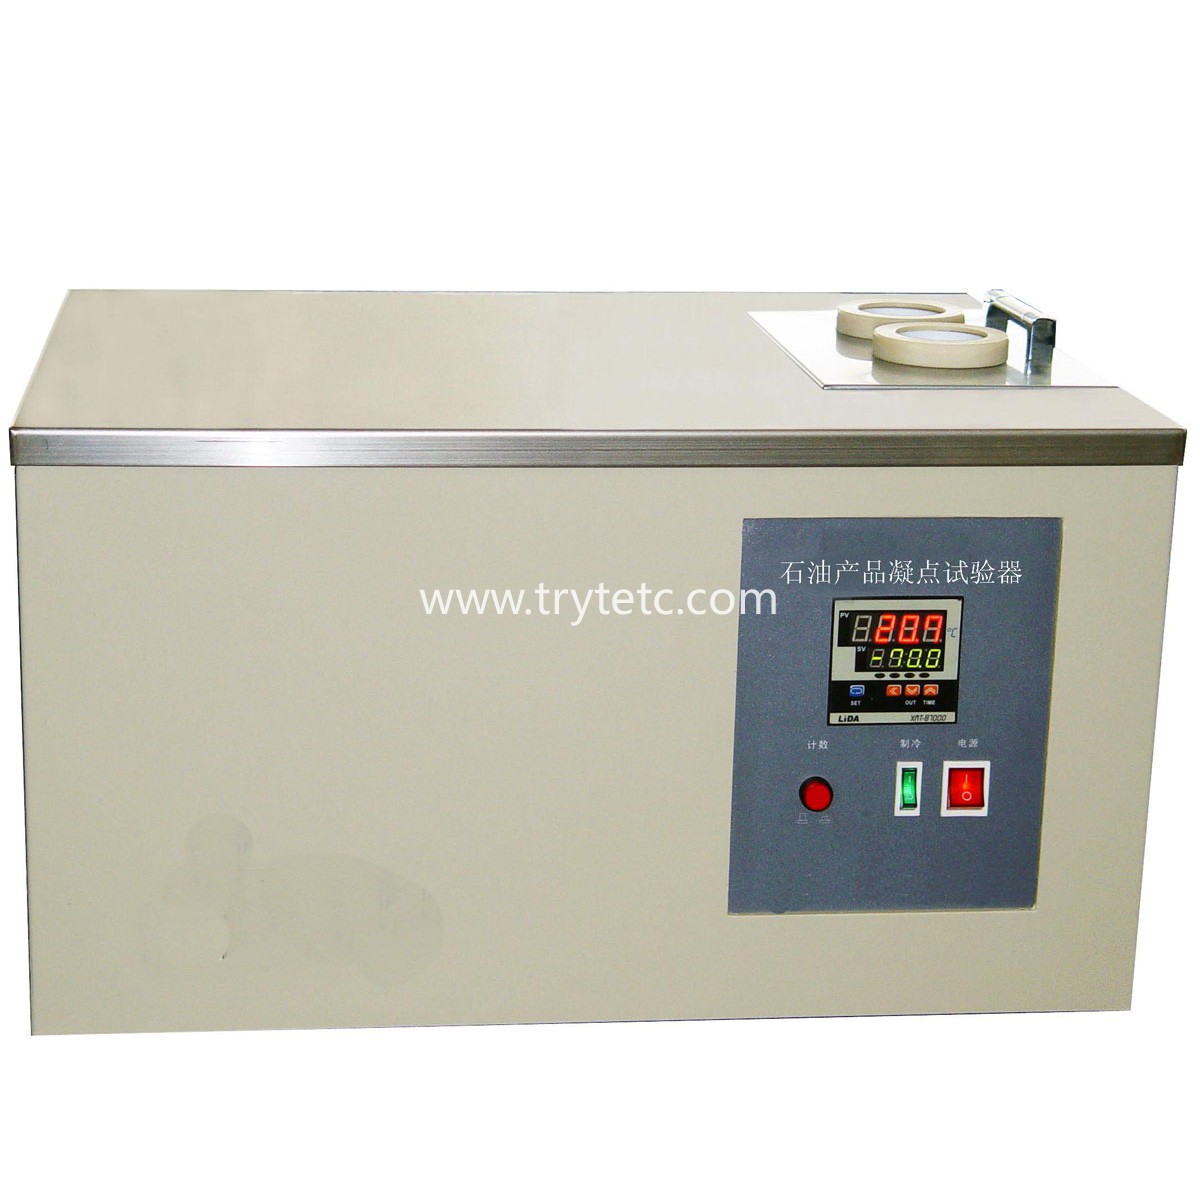 TR-TC-510G Solidifying Point Tester